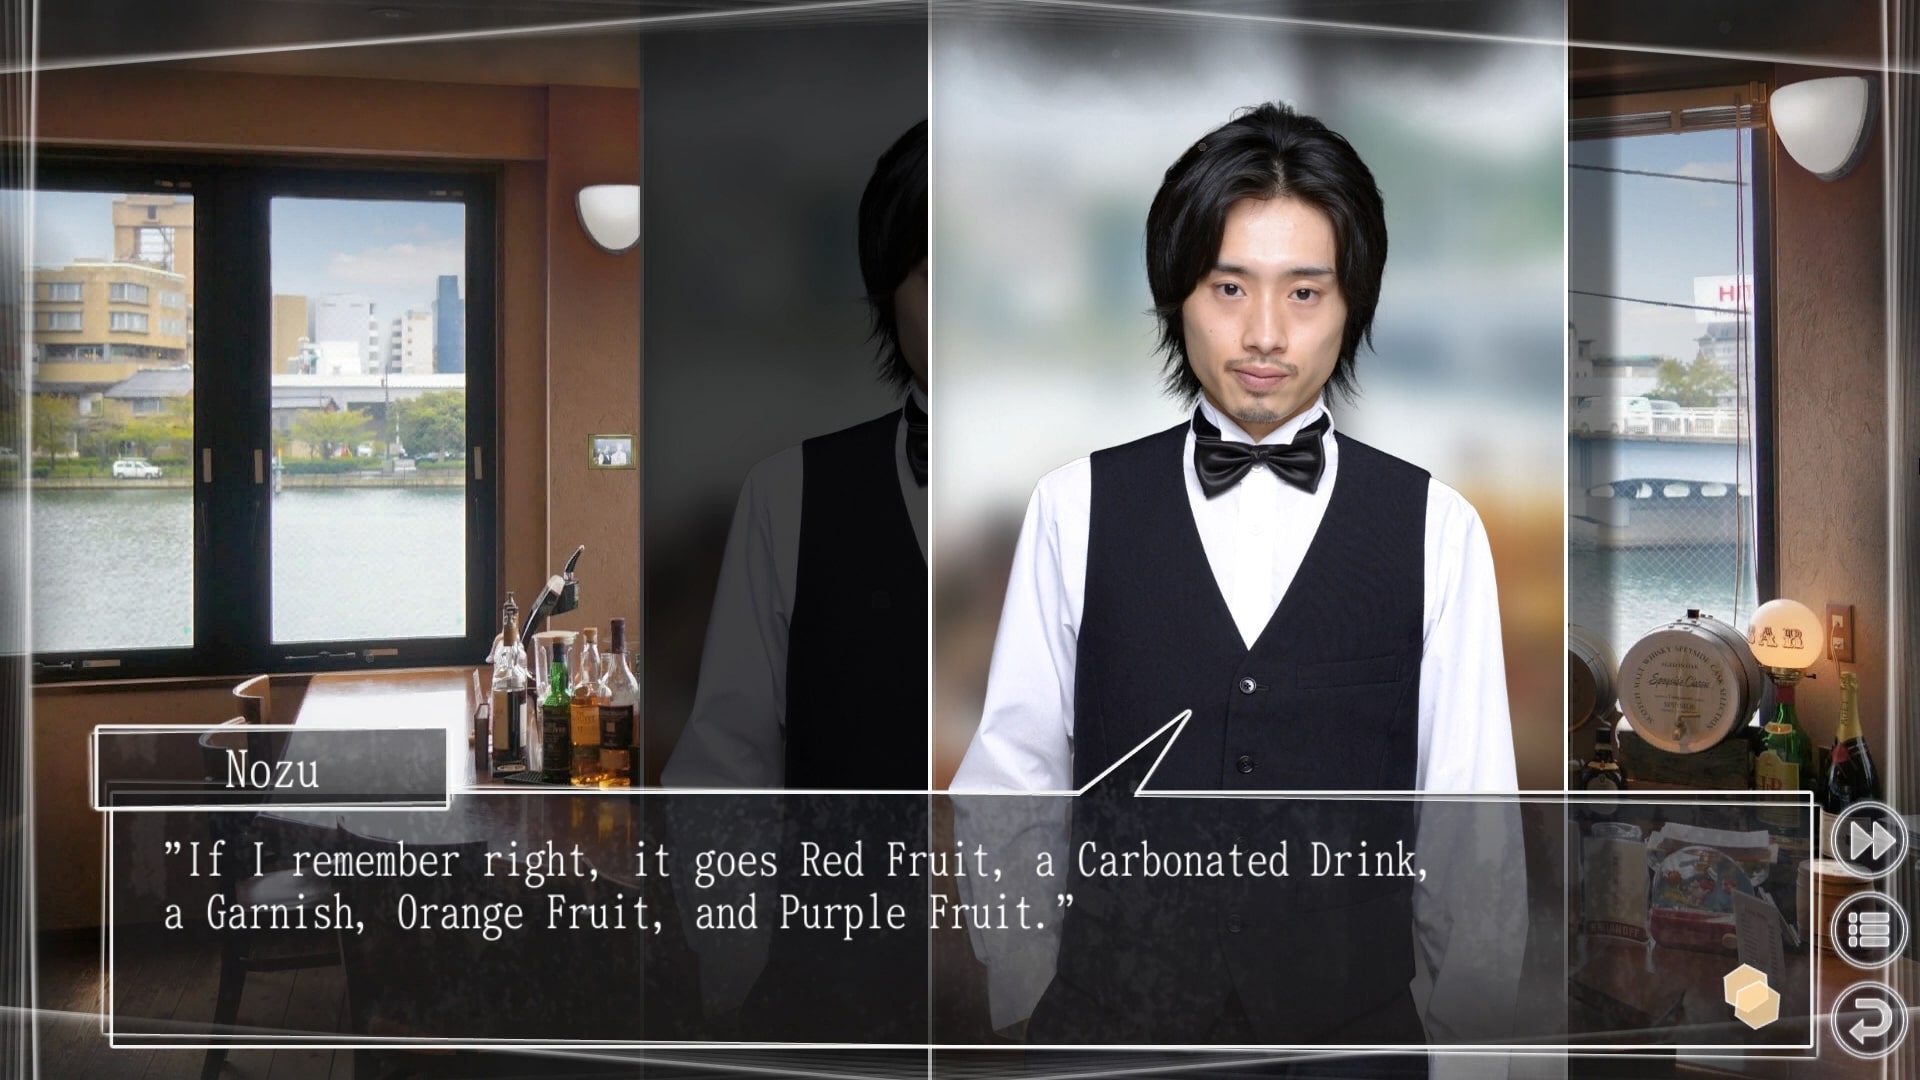 Root Letter Last Answer Additional Scenarios for Root Letter Last Answer Walkthrough - Scenario 3: The Nakamura Bar Special Cocktail - E6E1288